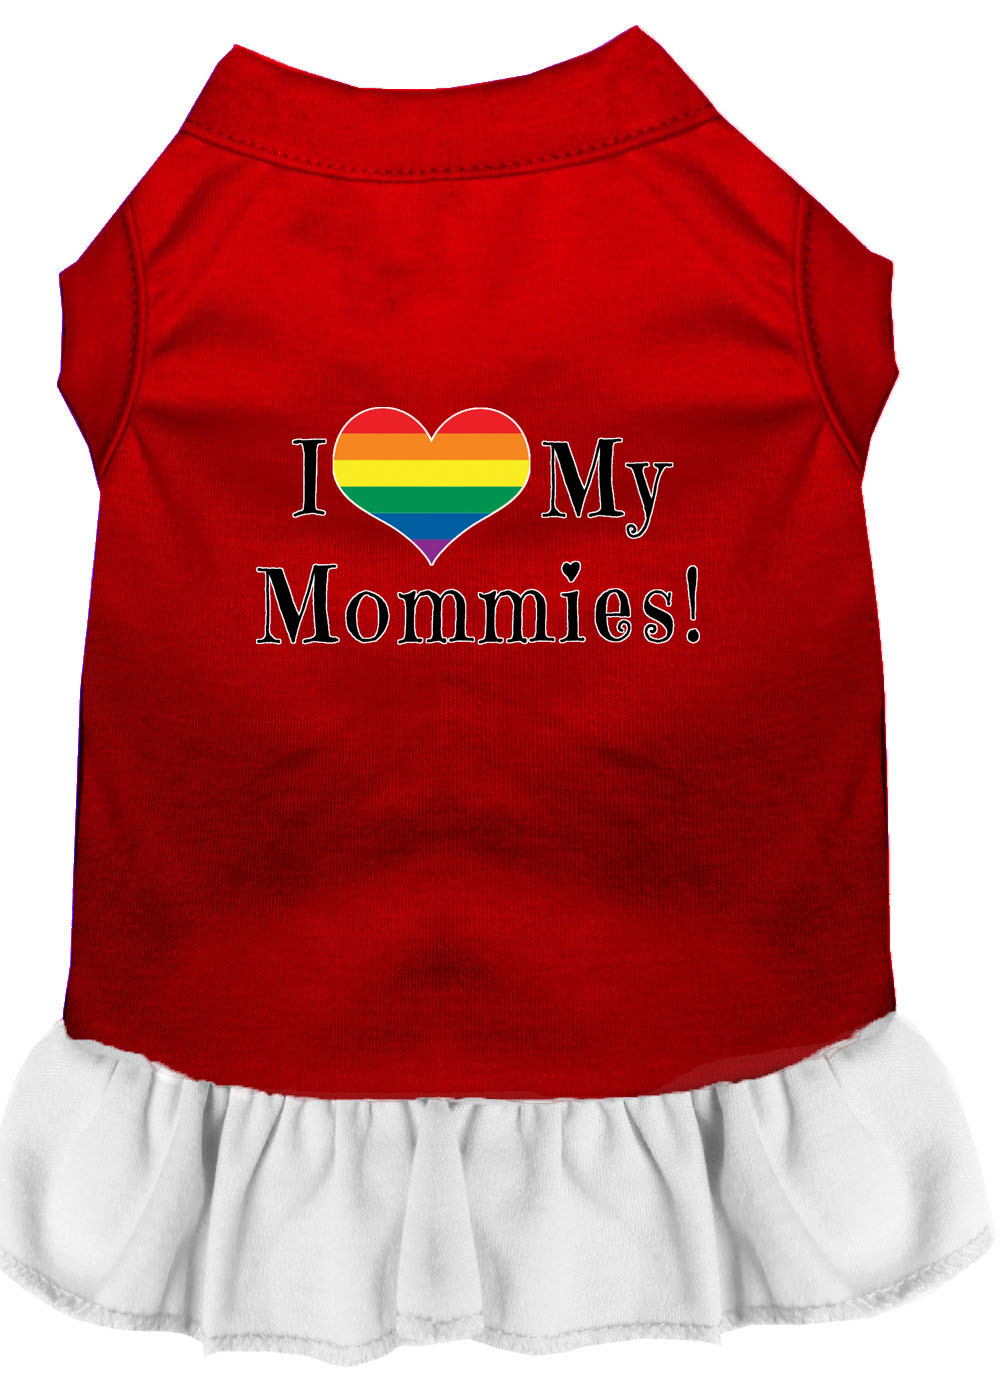 I Heart my Mommies Screen Print Dog Dress Red with White Med